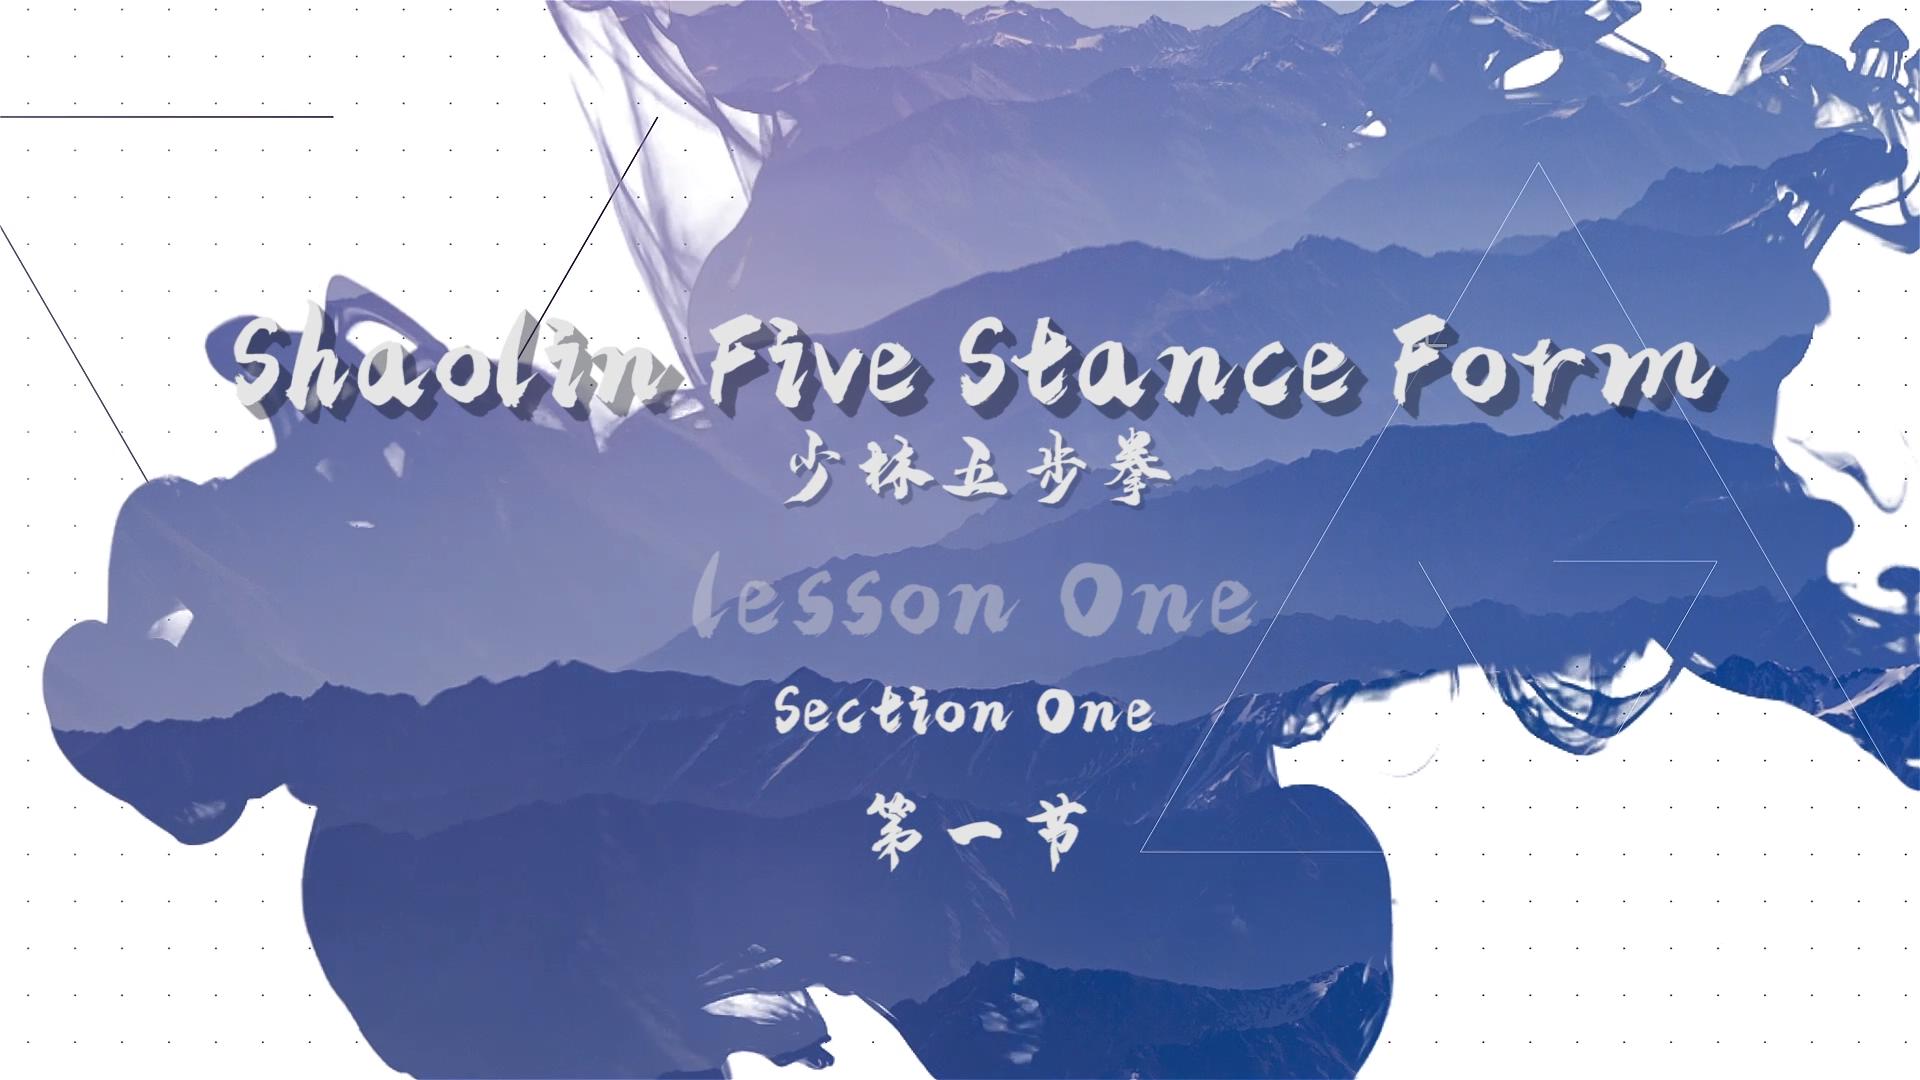 Shaolin Five Stance Form  Section